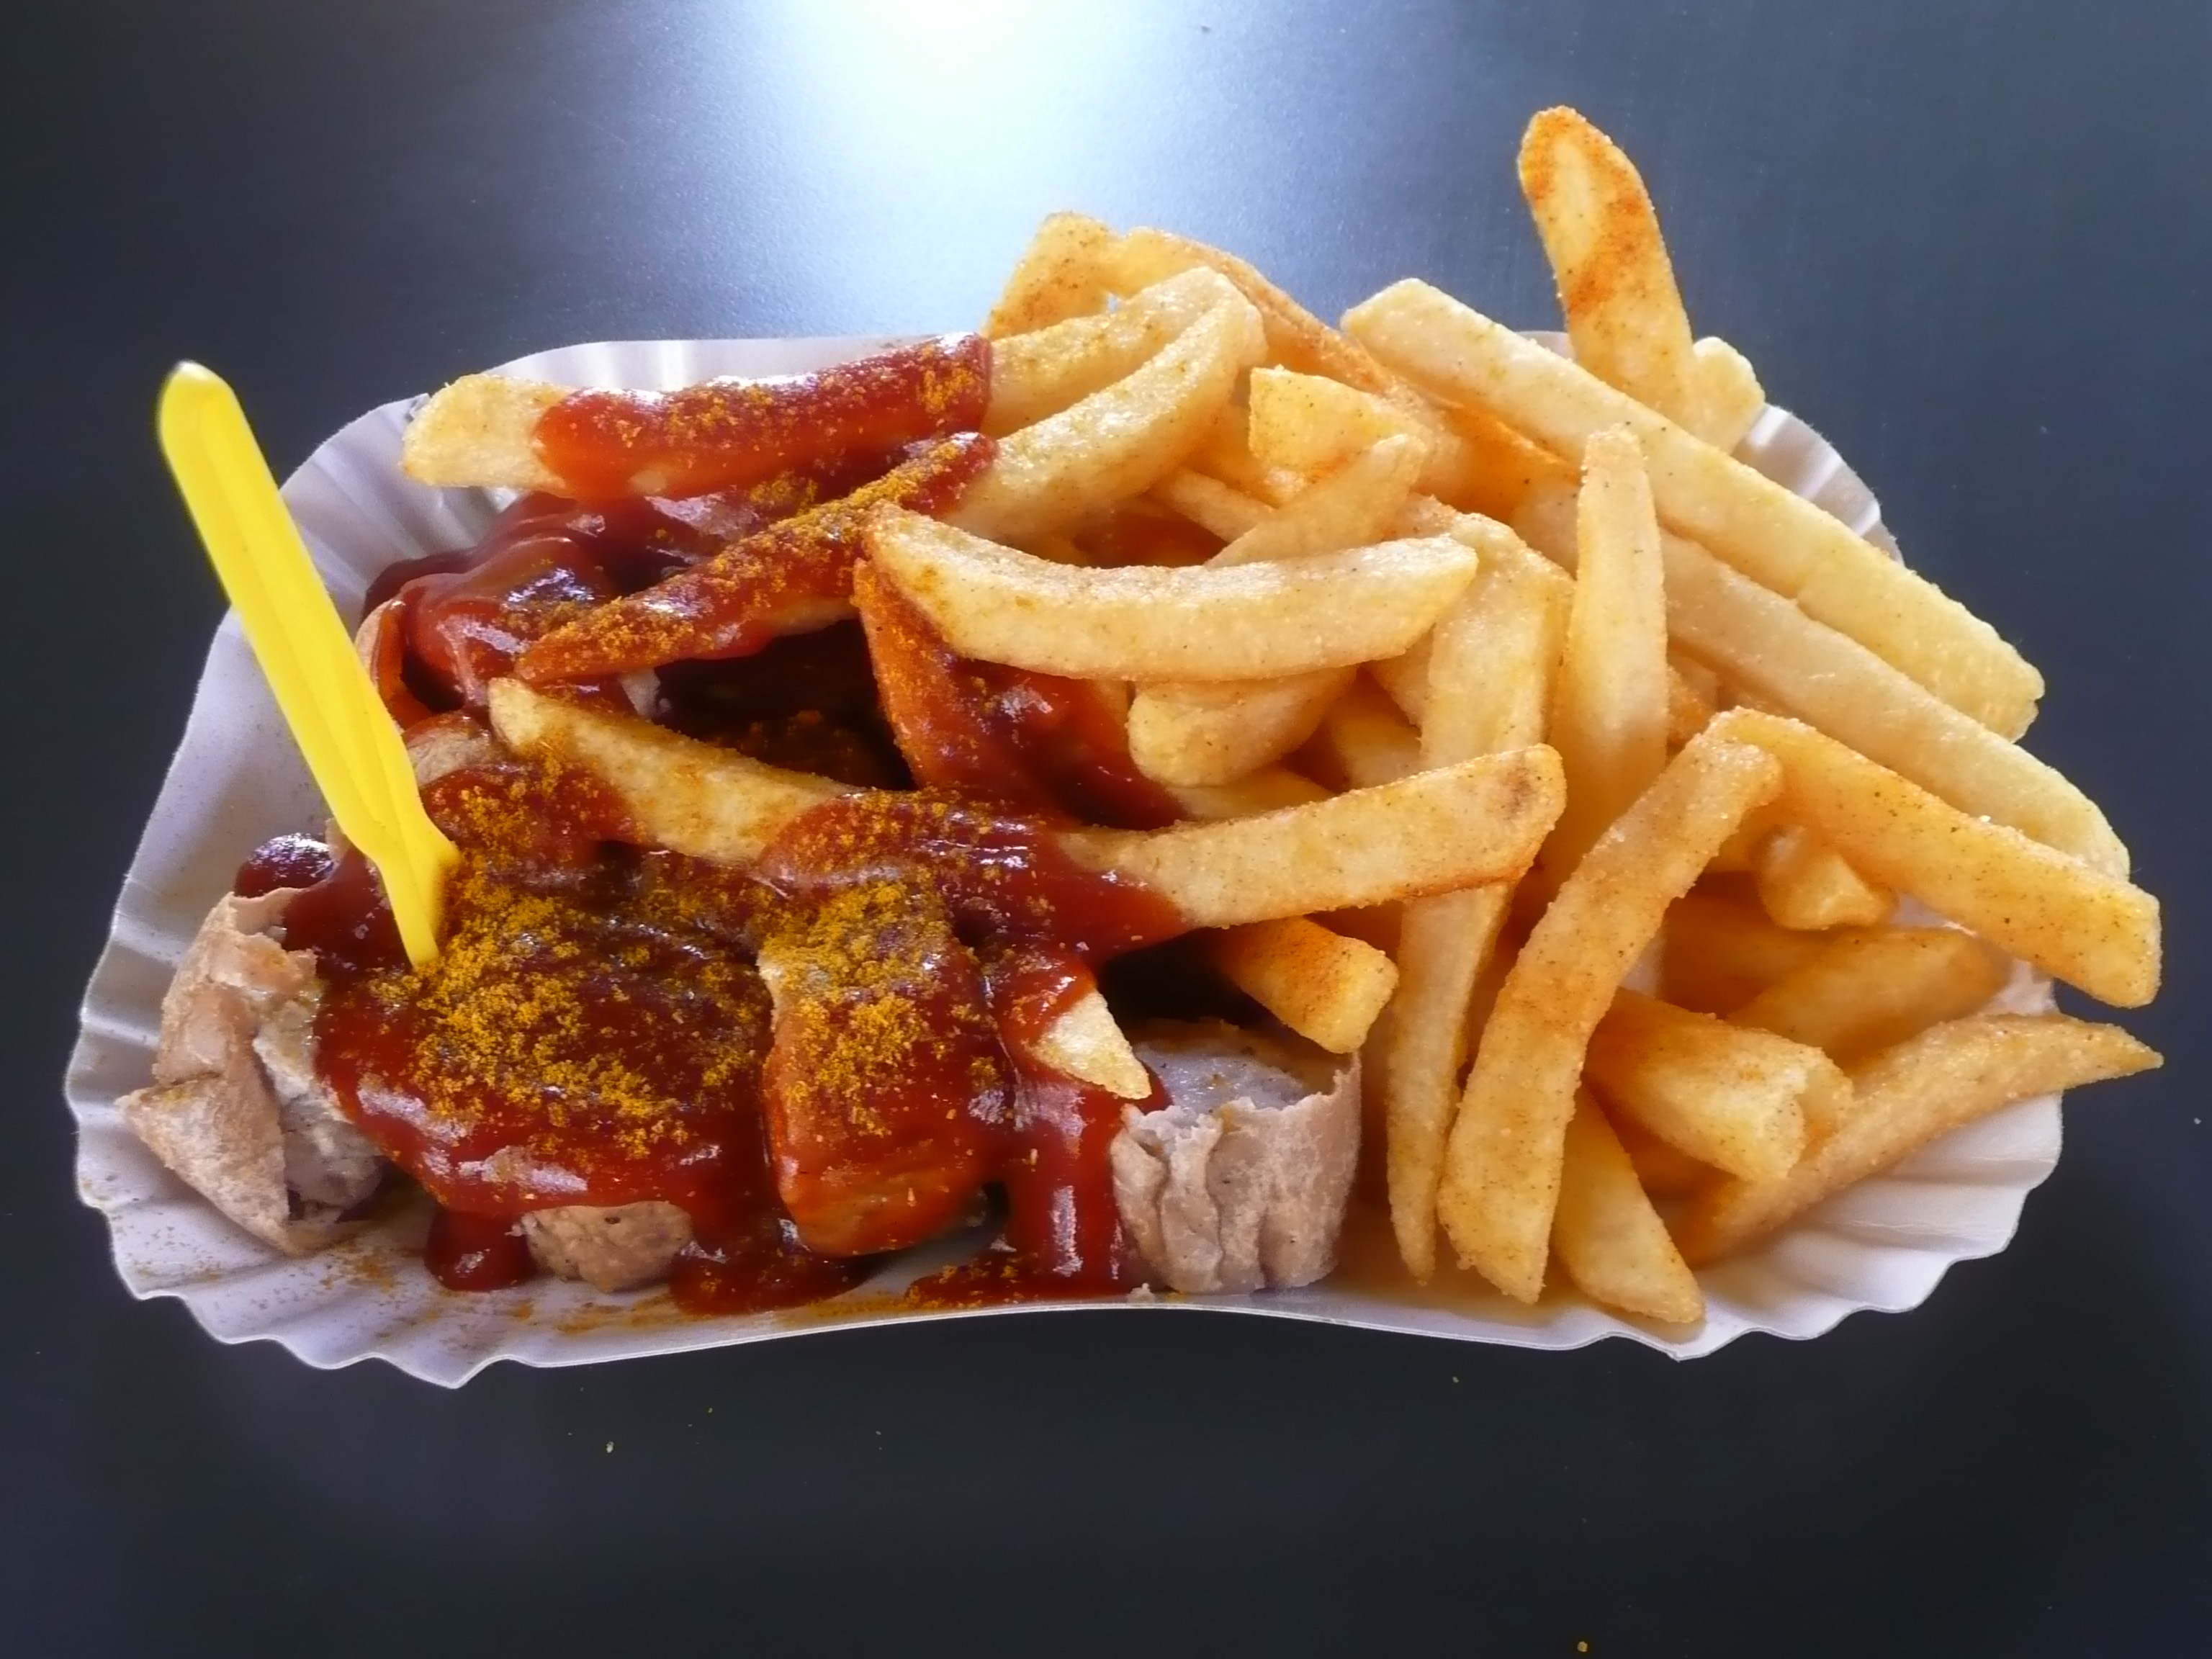 Image result for berlin Currywurst mit Pommes at Curry 36 or Konnopkes Imbiss"